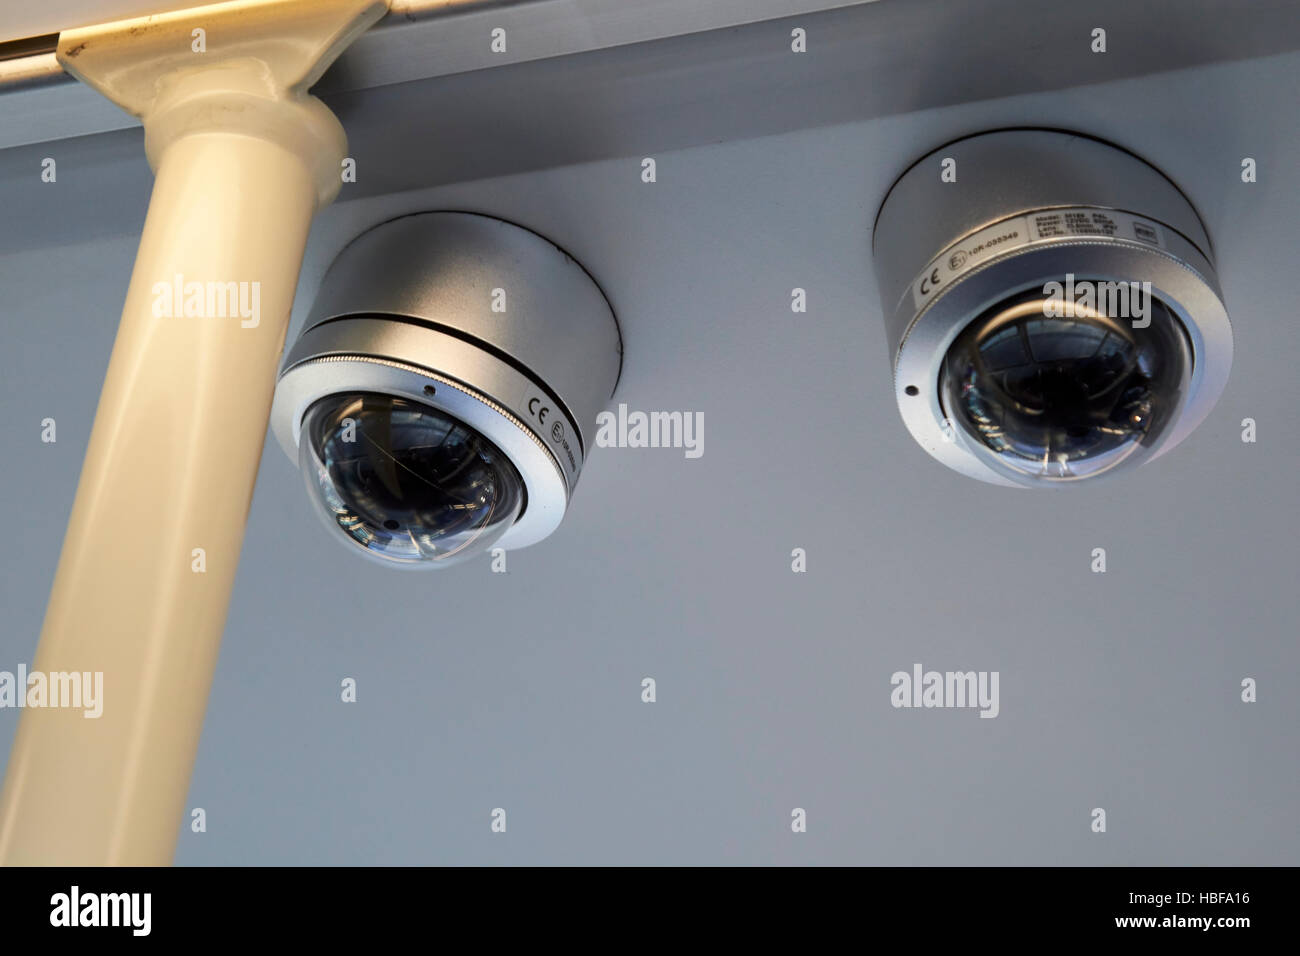 cctv cameras on the interior ceiling of a bus in the uk Stock Photo